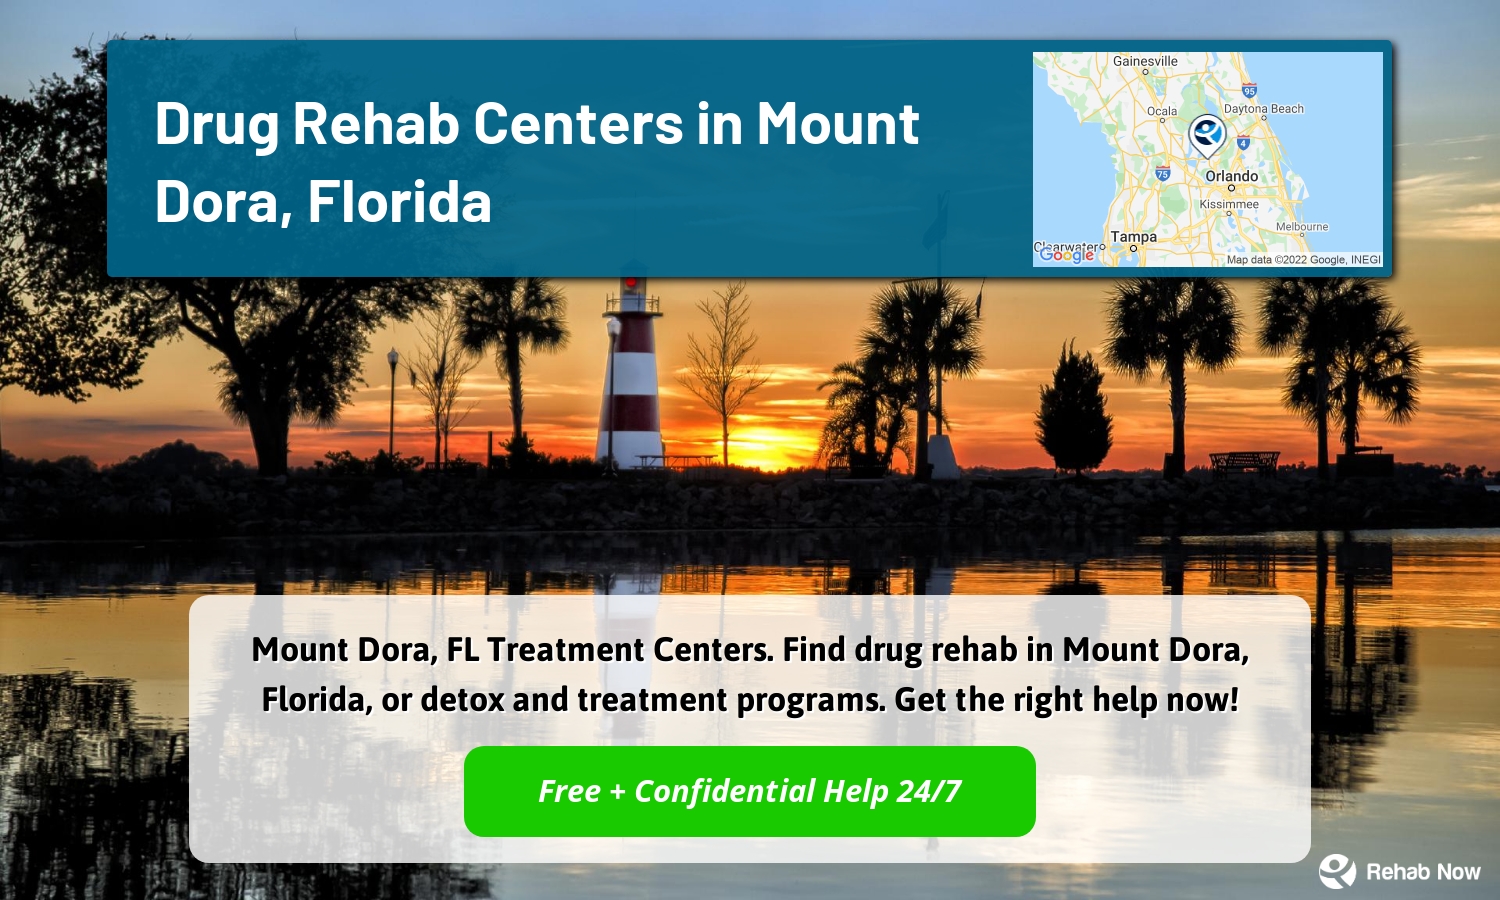 Mount Dora, FL Treatment Centers. Find drug rehab in Mount Dora, Florida, or detox and treatment programs. Get the right help now!